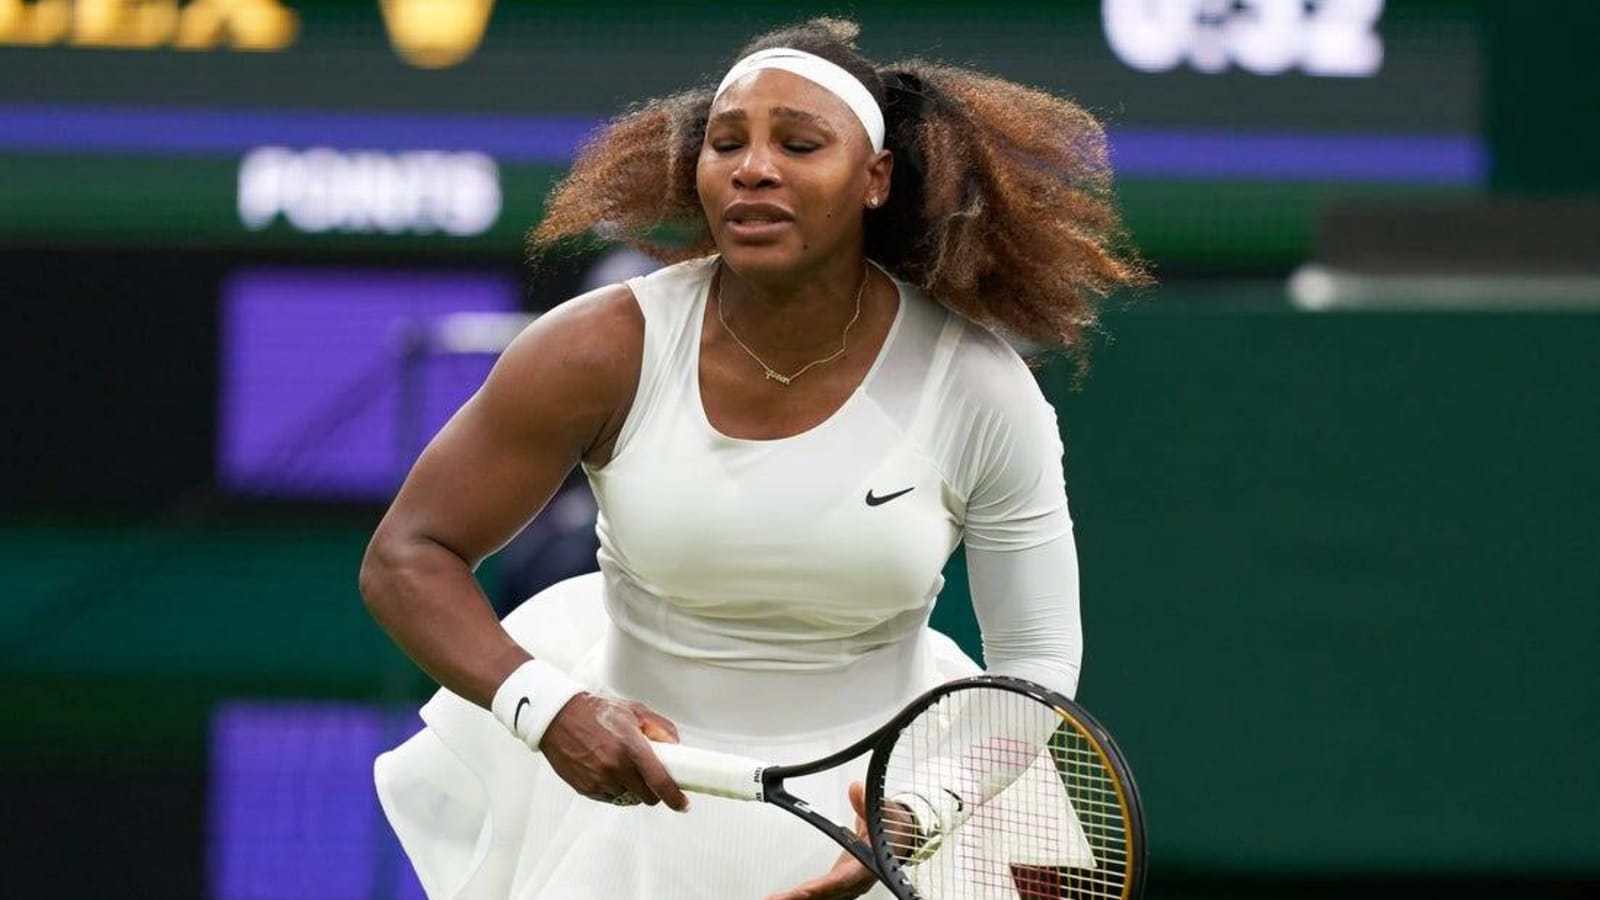 Serena Williams wins doubles match in return from year-long absence